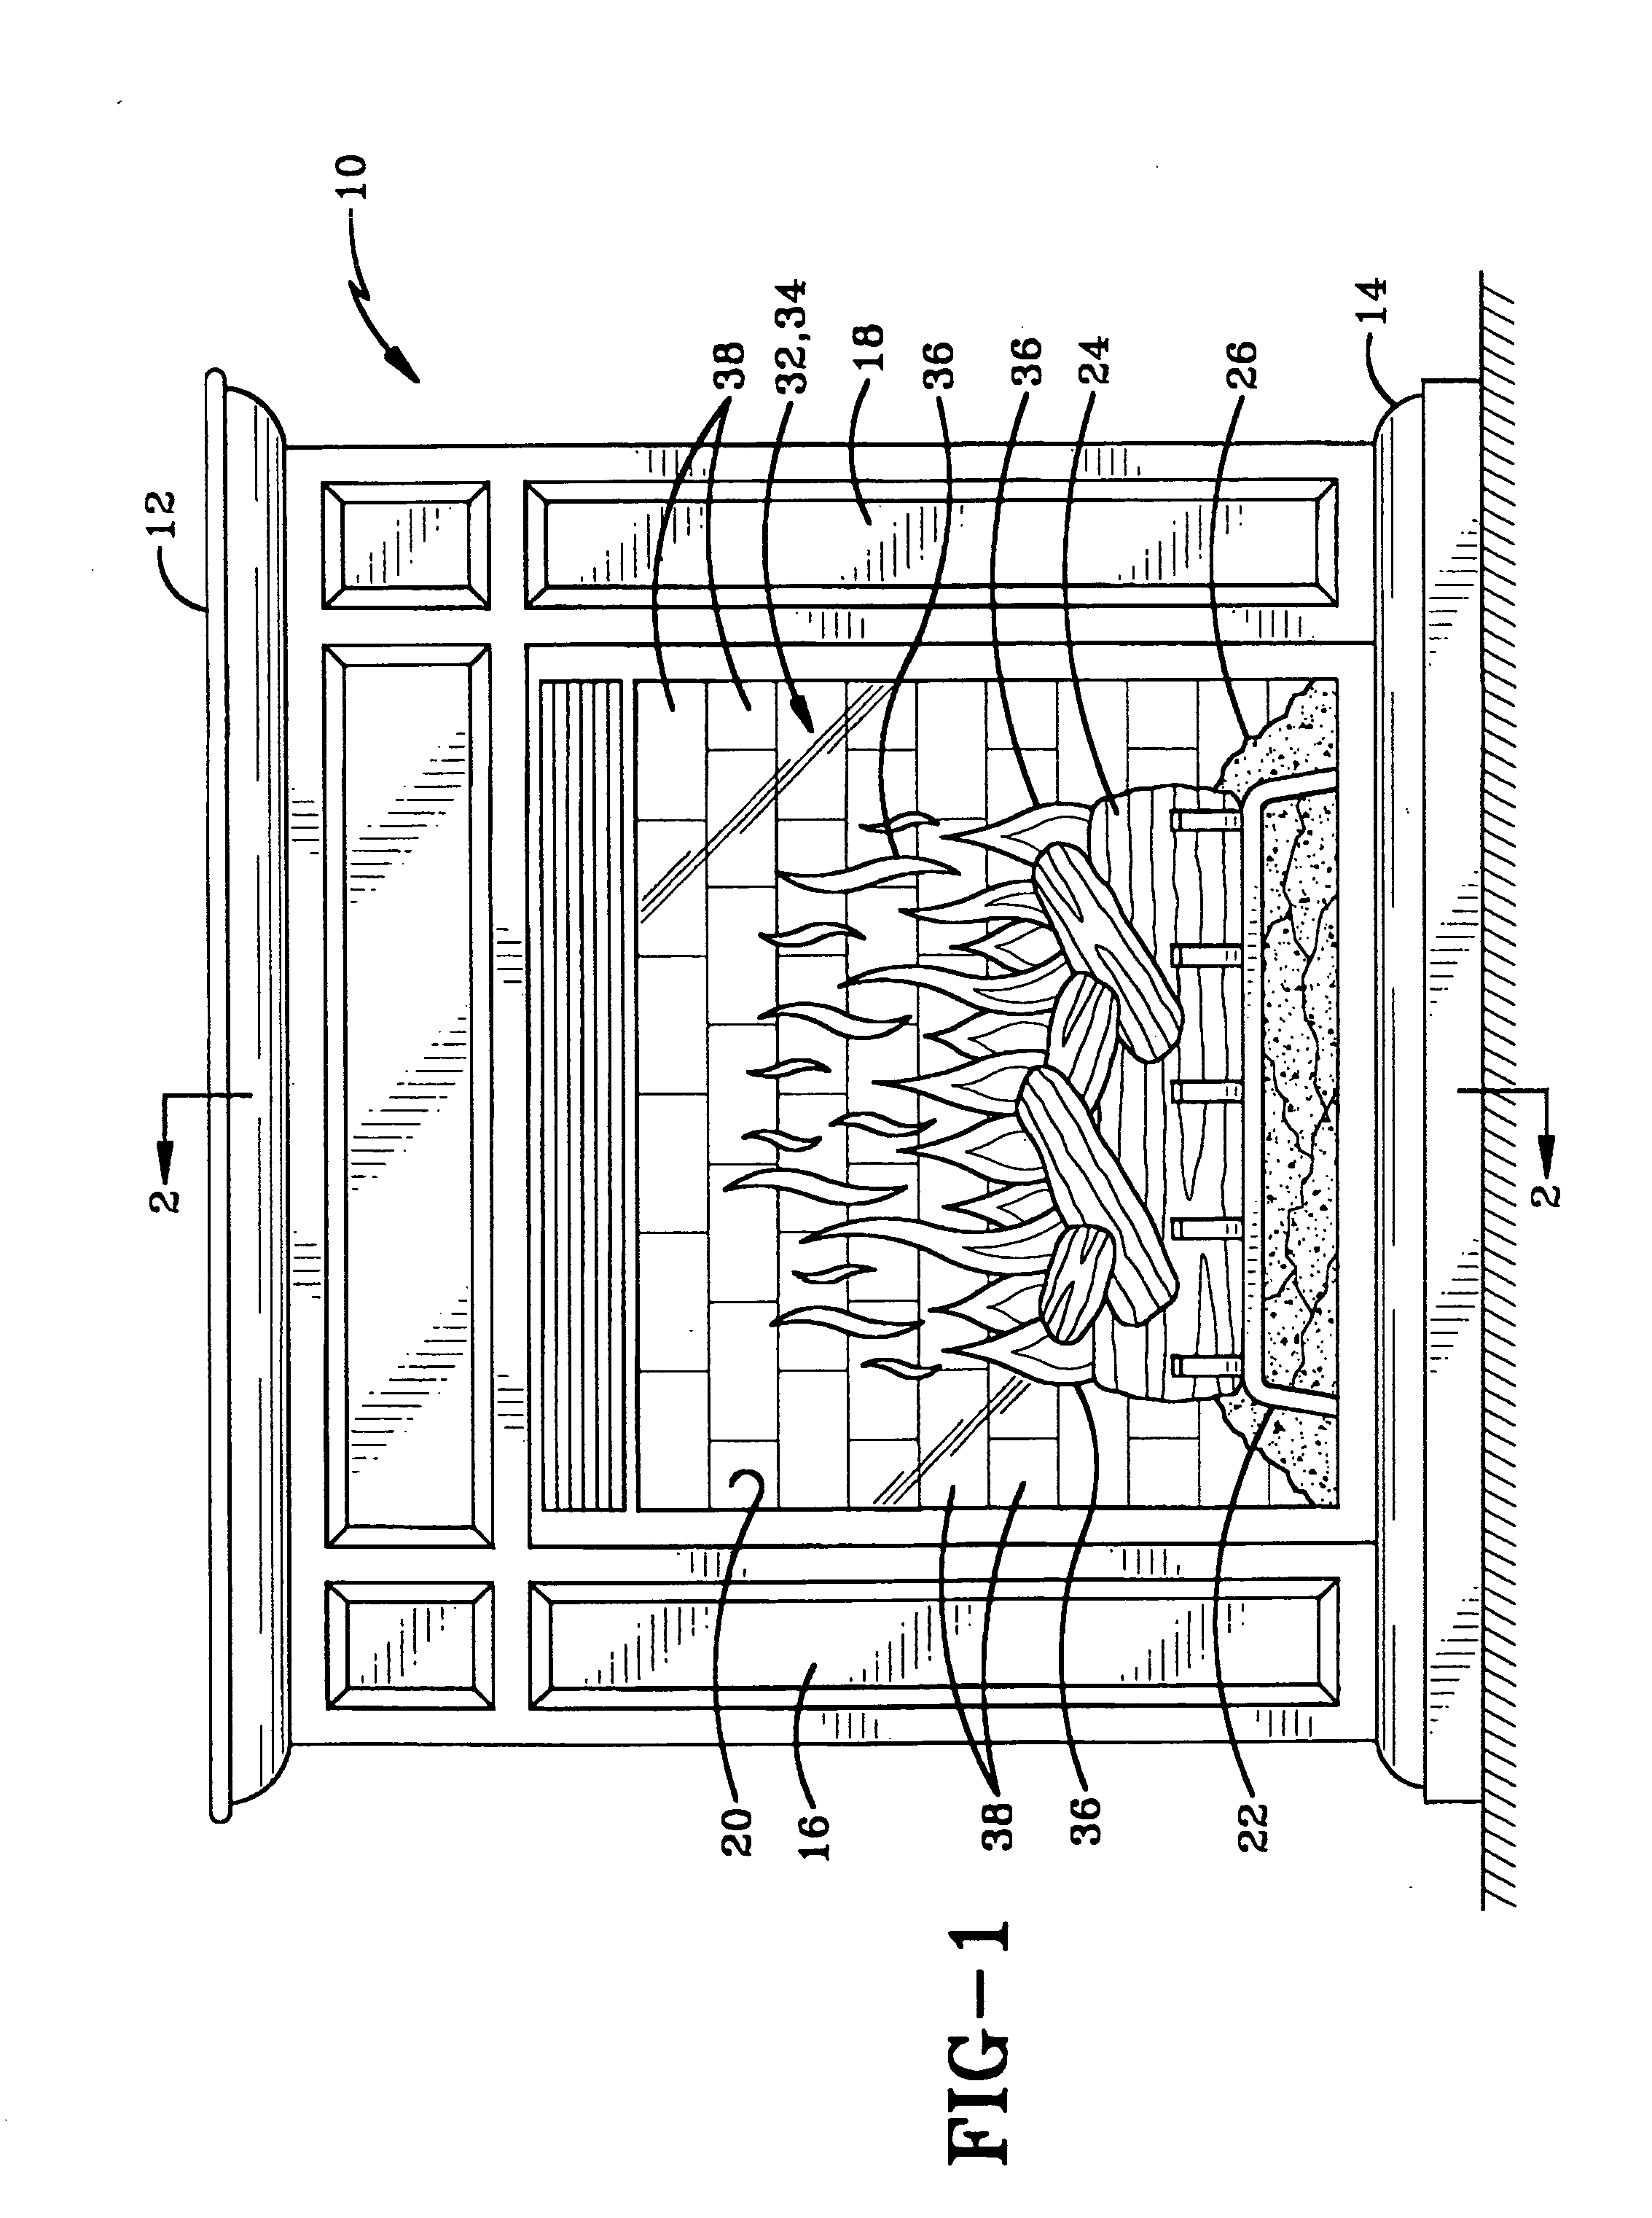 Panel for use in electric fireplace and fireplace incorporating the same